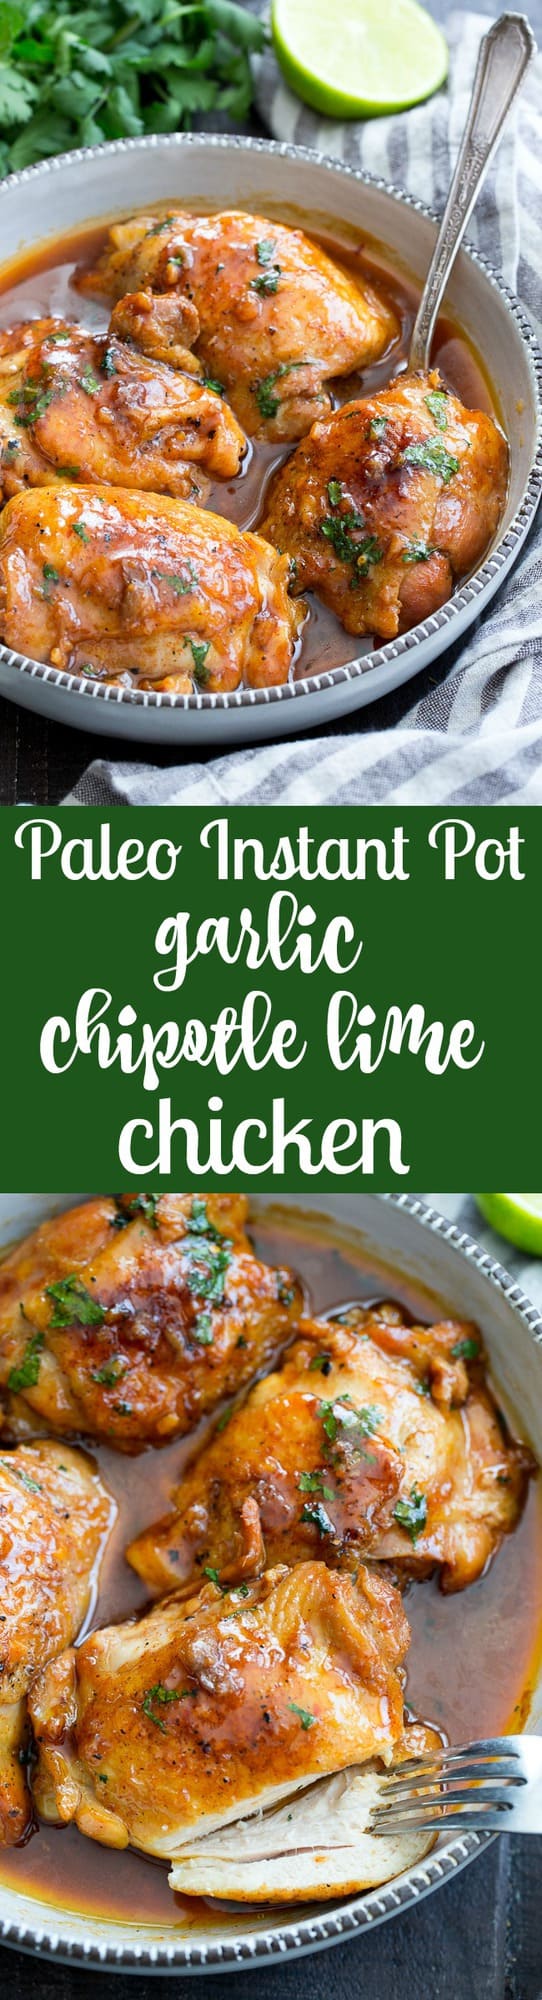 This garlic chipotle lime chicken is packed with tons of flavor and is incredibly easy to make in the Instant Pot!  The chicken is seared and pressure cooked in spicy/sweet sauce for a result that's sure to make everyone in your family happy!  Healthy, hearty, paleo friendly with a Whole30 option. 